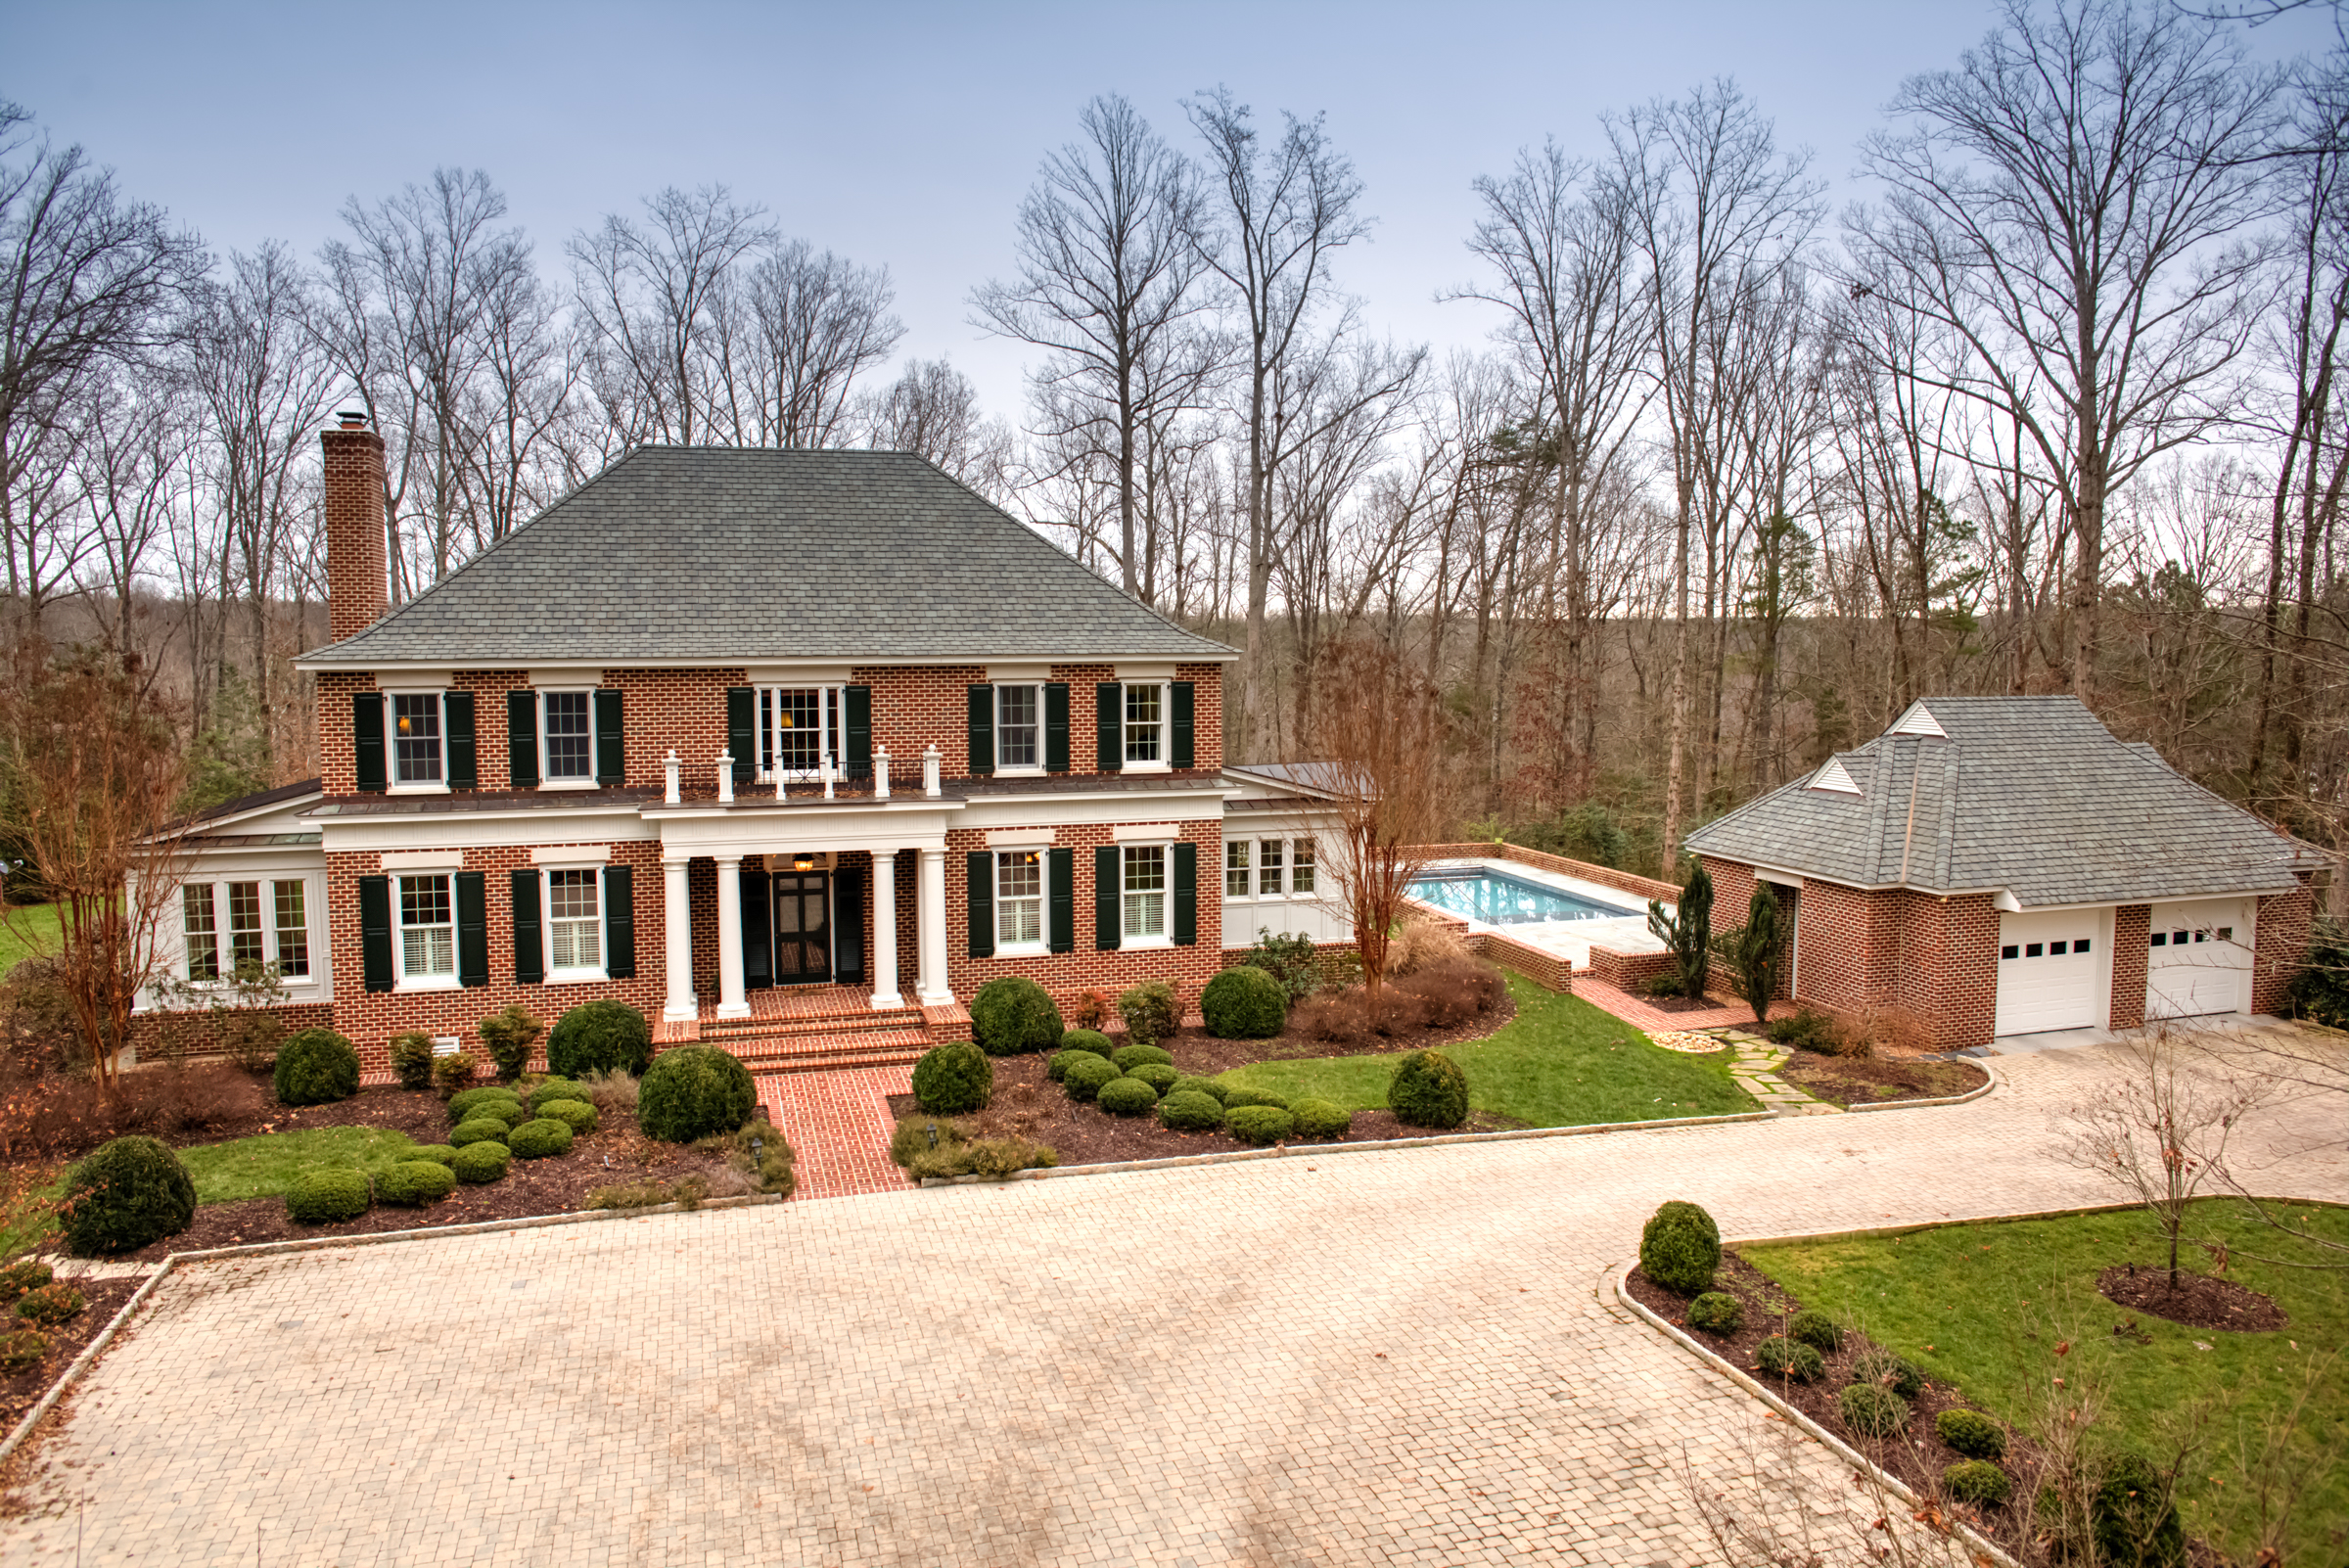 This lovely Rockville, Virginia home has four bedrooms, four and a half bathrooms, a pool and 20 acres of land.